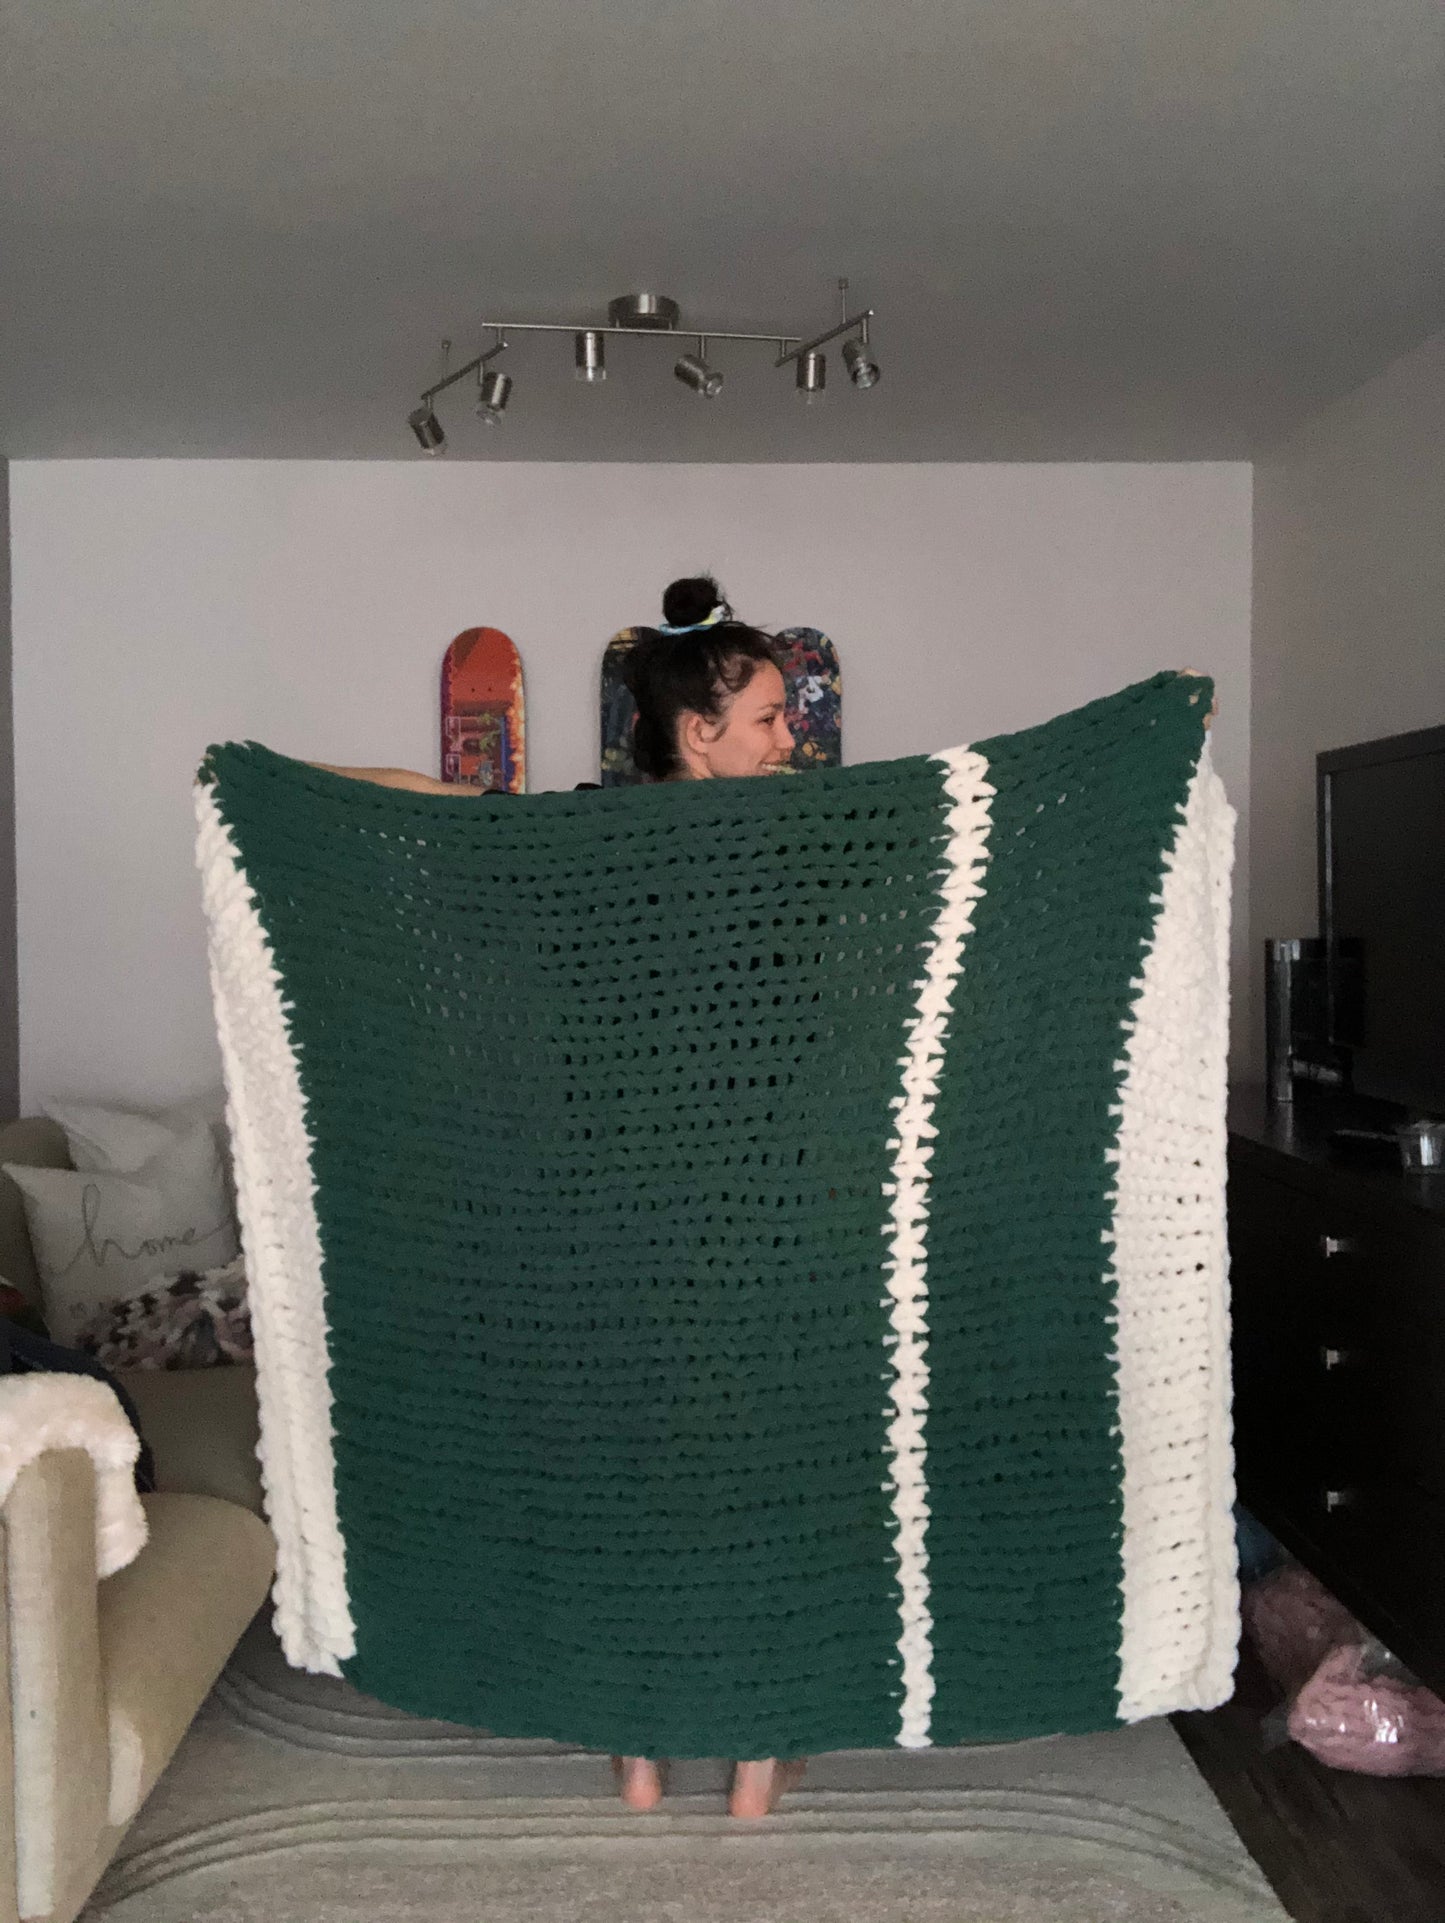 Healing Hand Knit, Chunky Knit Blankets Emerald & White